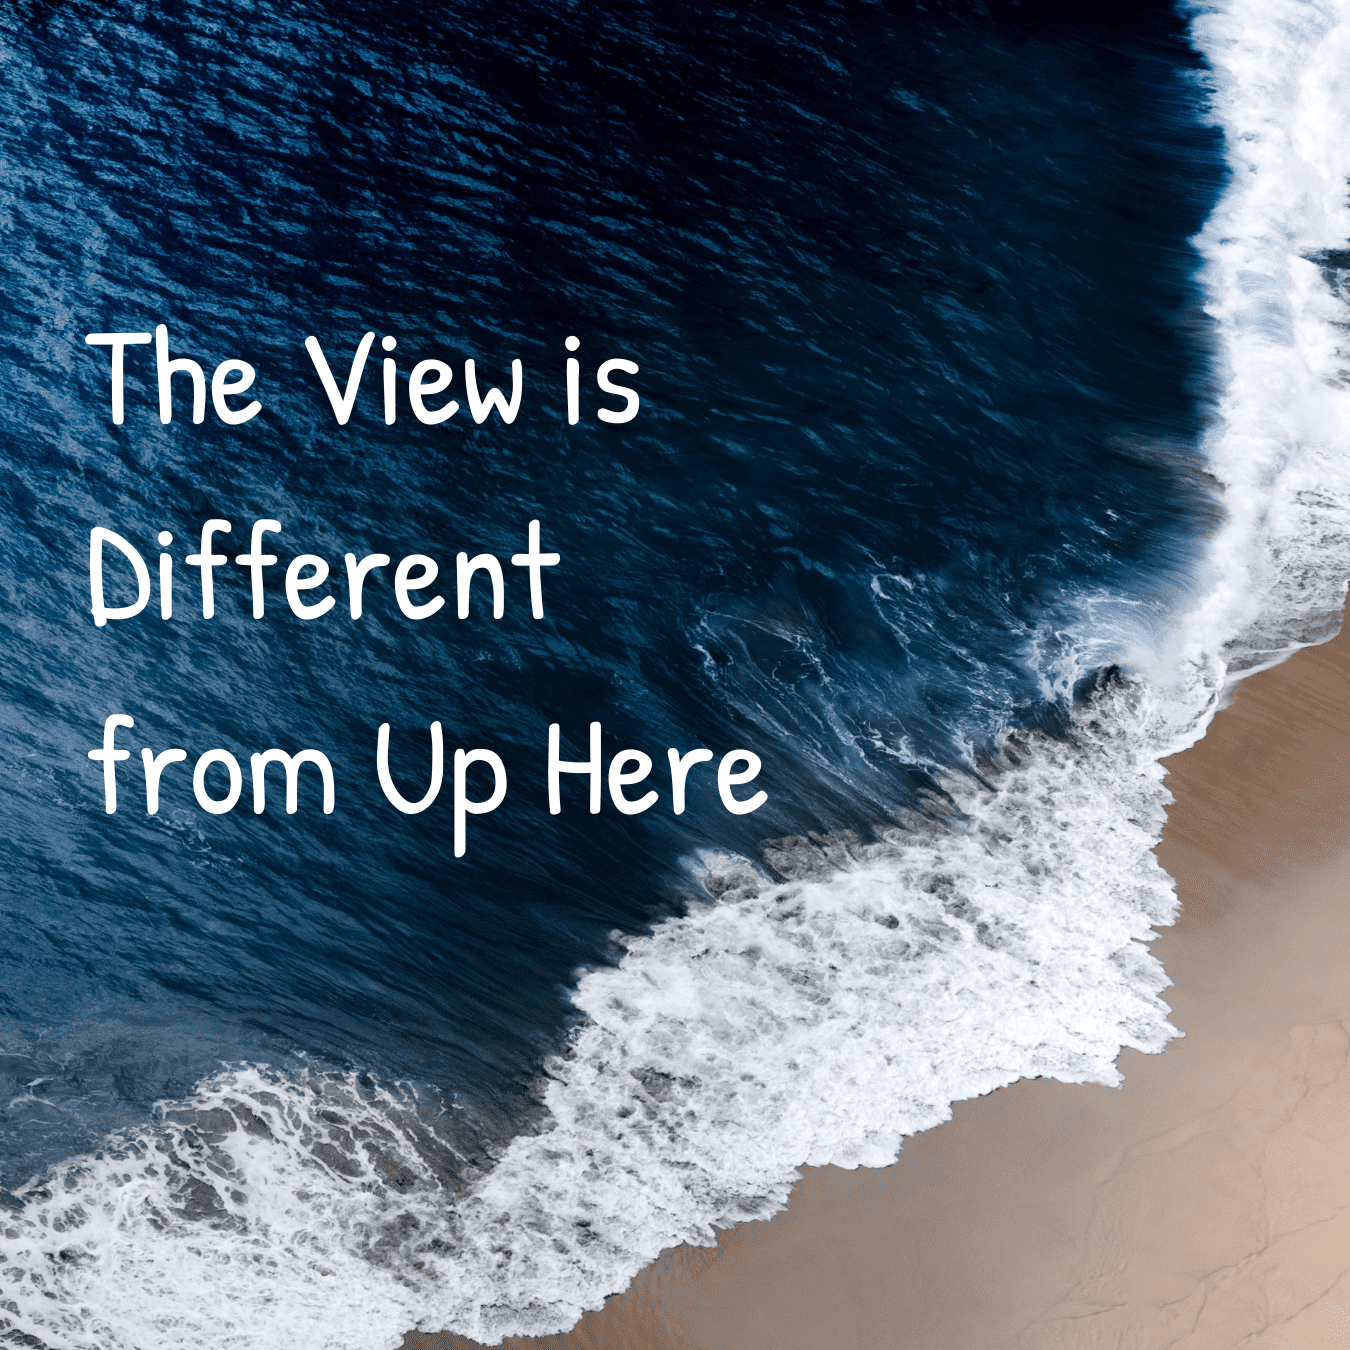 Featured image for “The View is Different from Up Here”